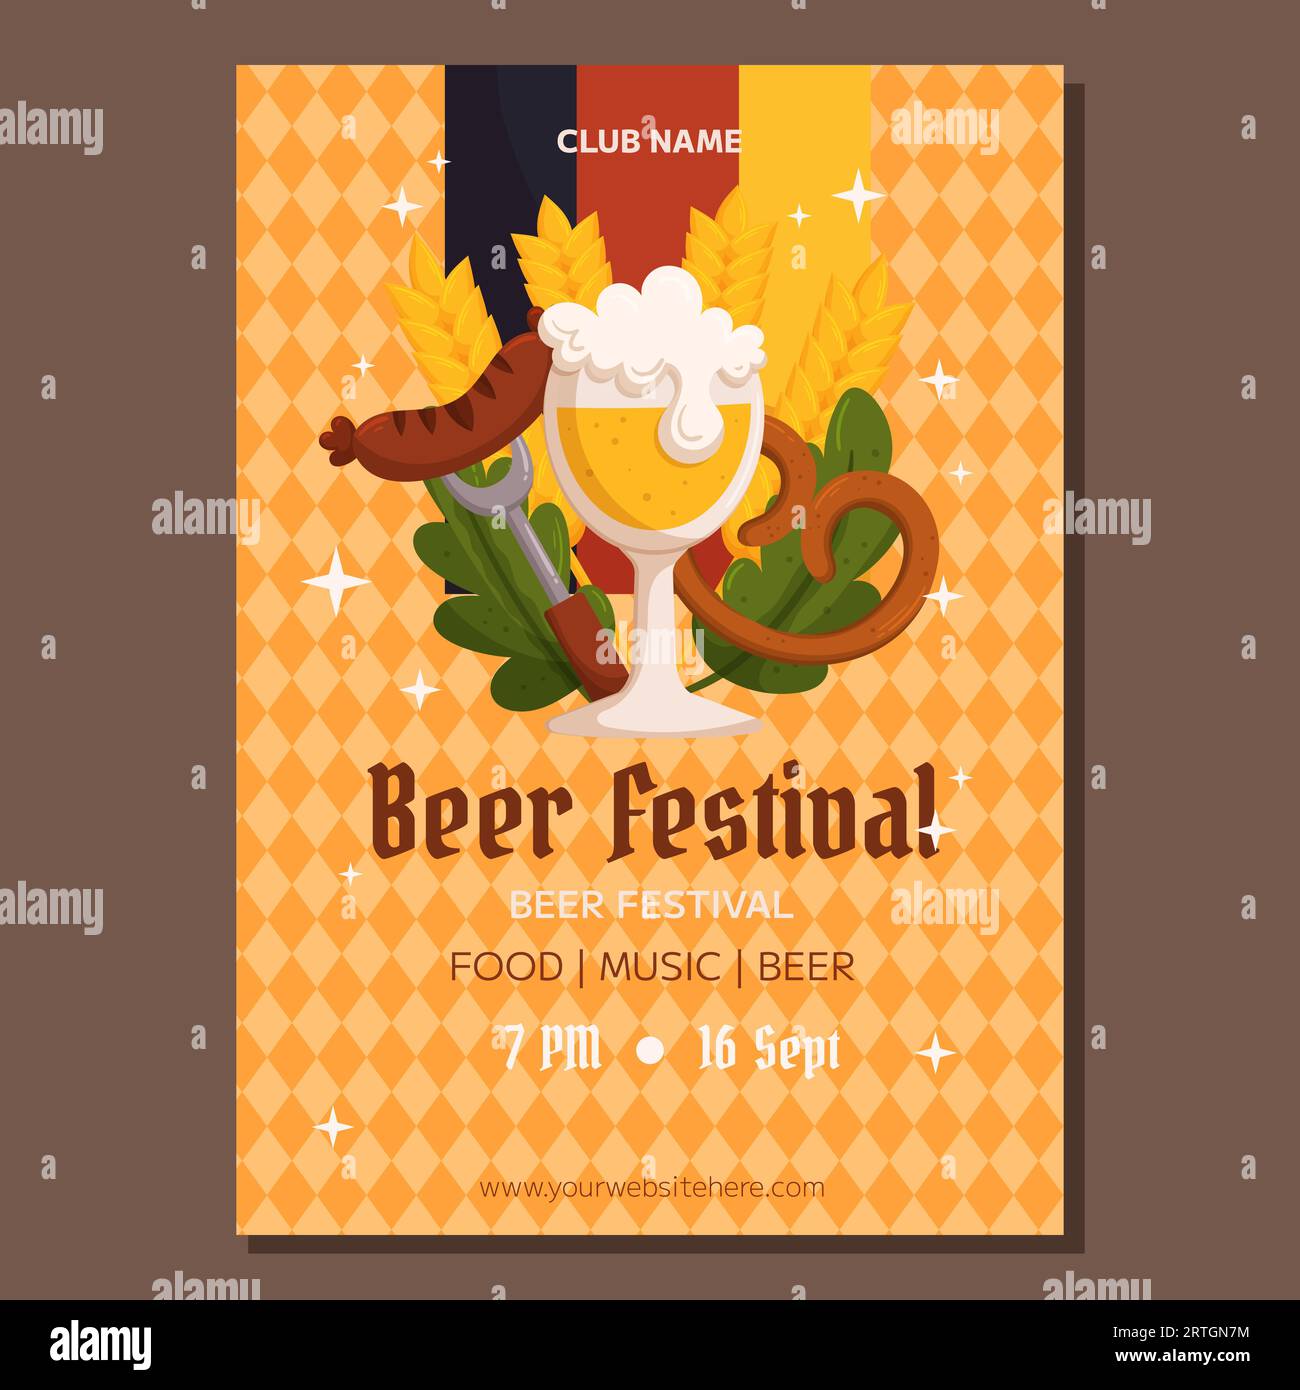 Beer festival poster template. Design with glass of beer, fork with grilled sausage, pretzel, wheat and leaves, Germany color flag. Light orange rhombus pattern Stock Vector